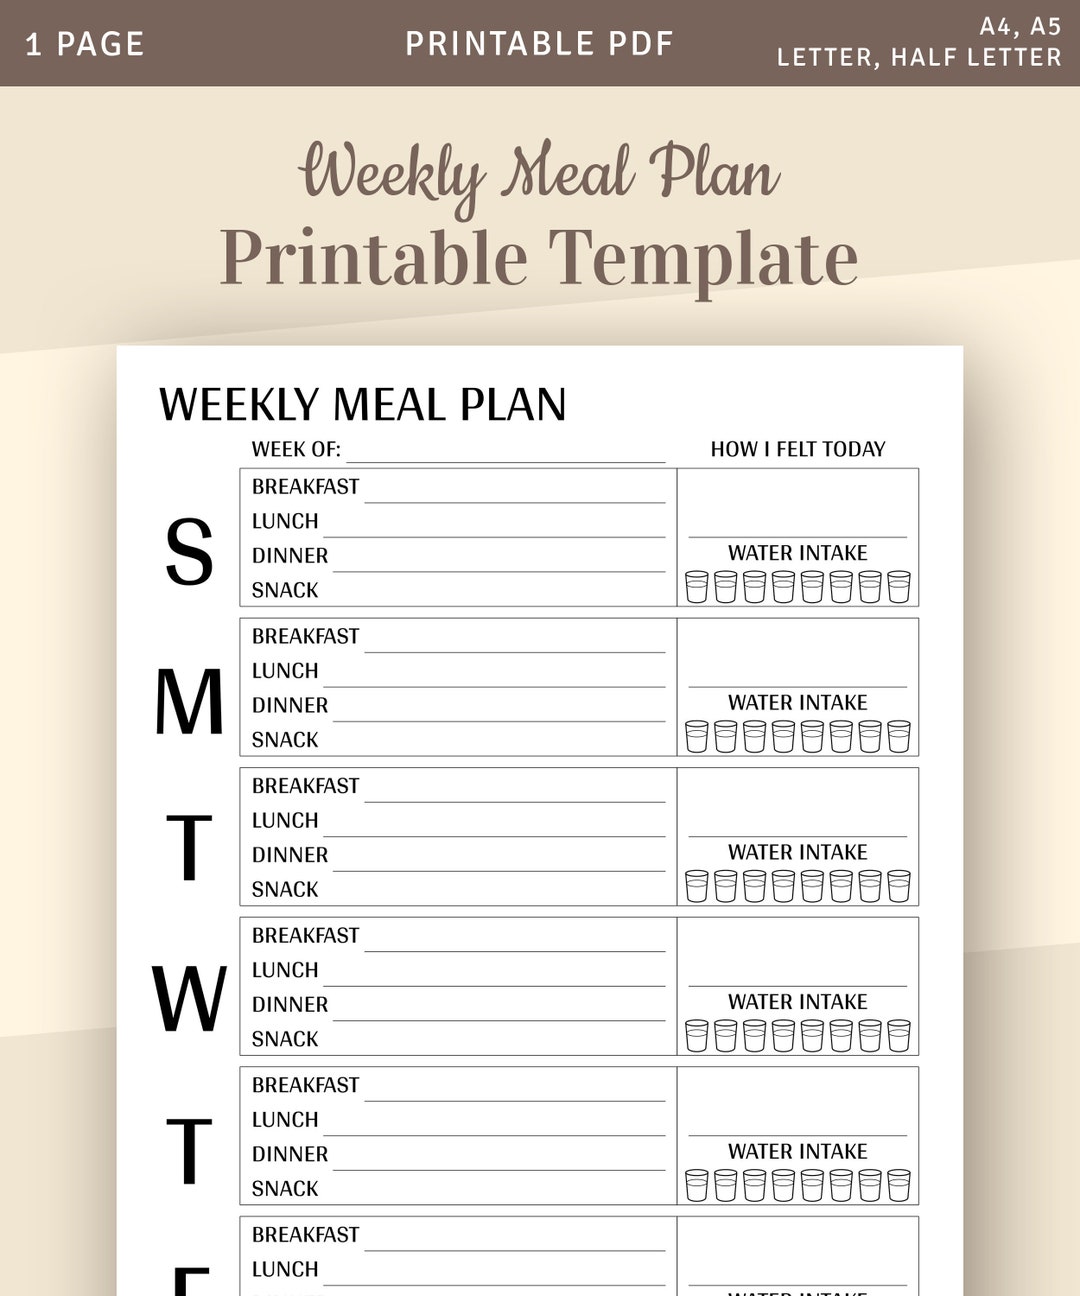 Weekly Meal Plan Printable, Meal Schedule Template, Instant Download ...